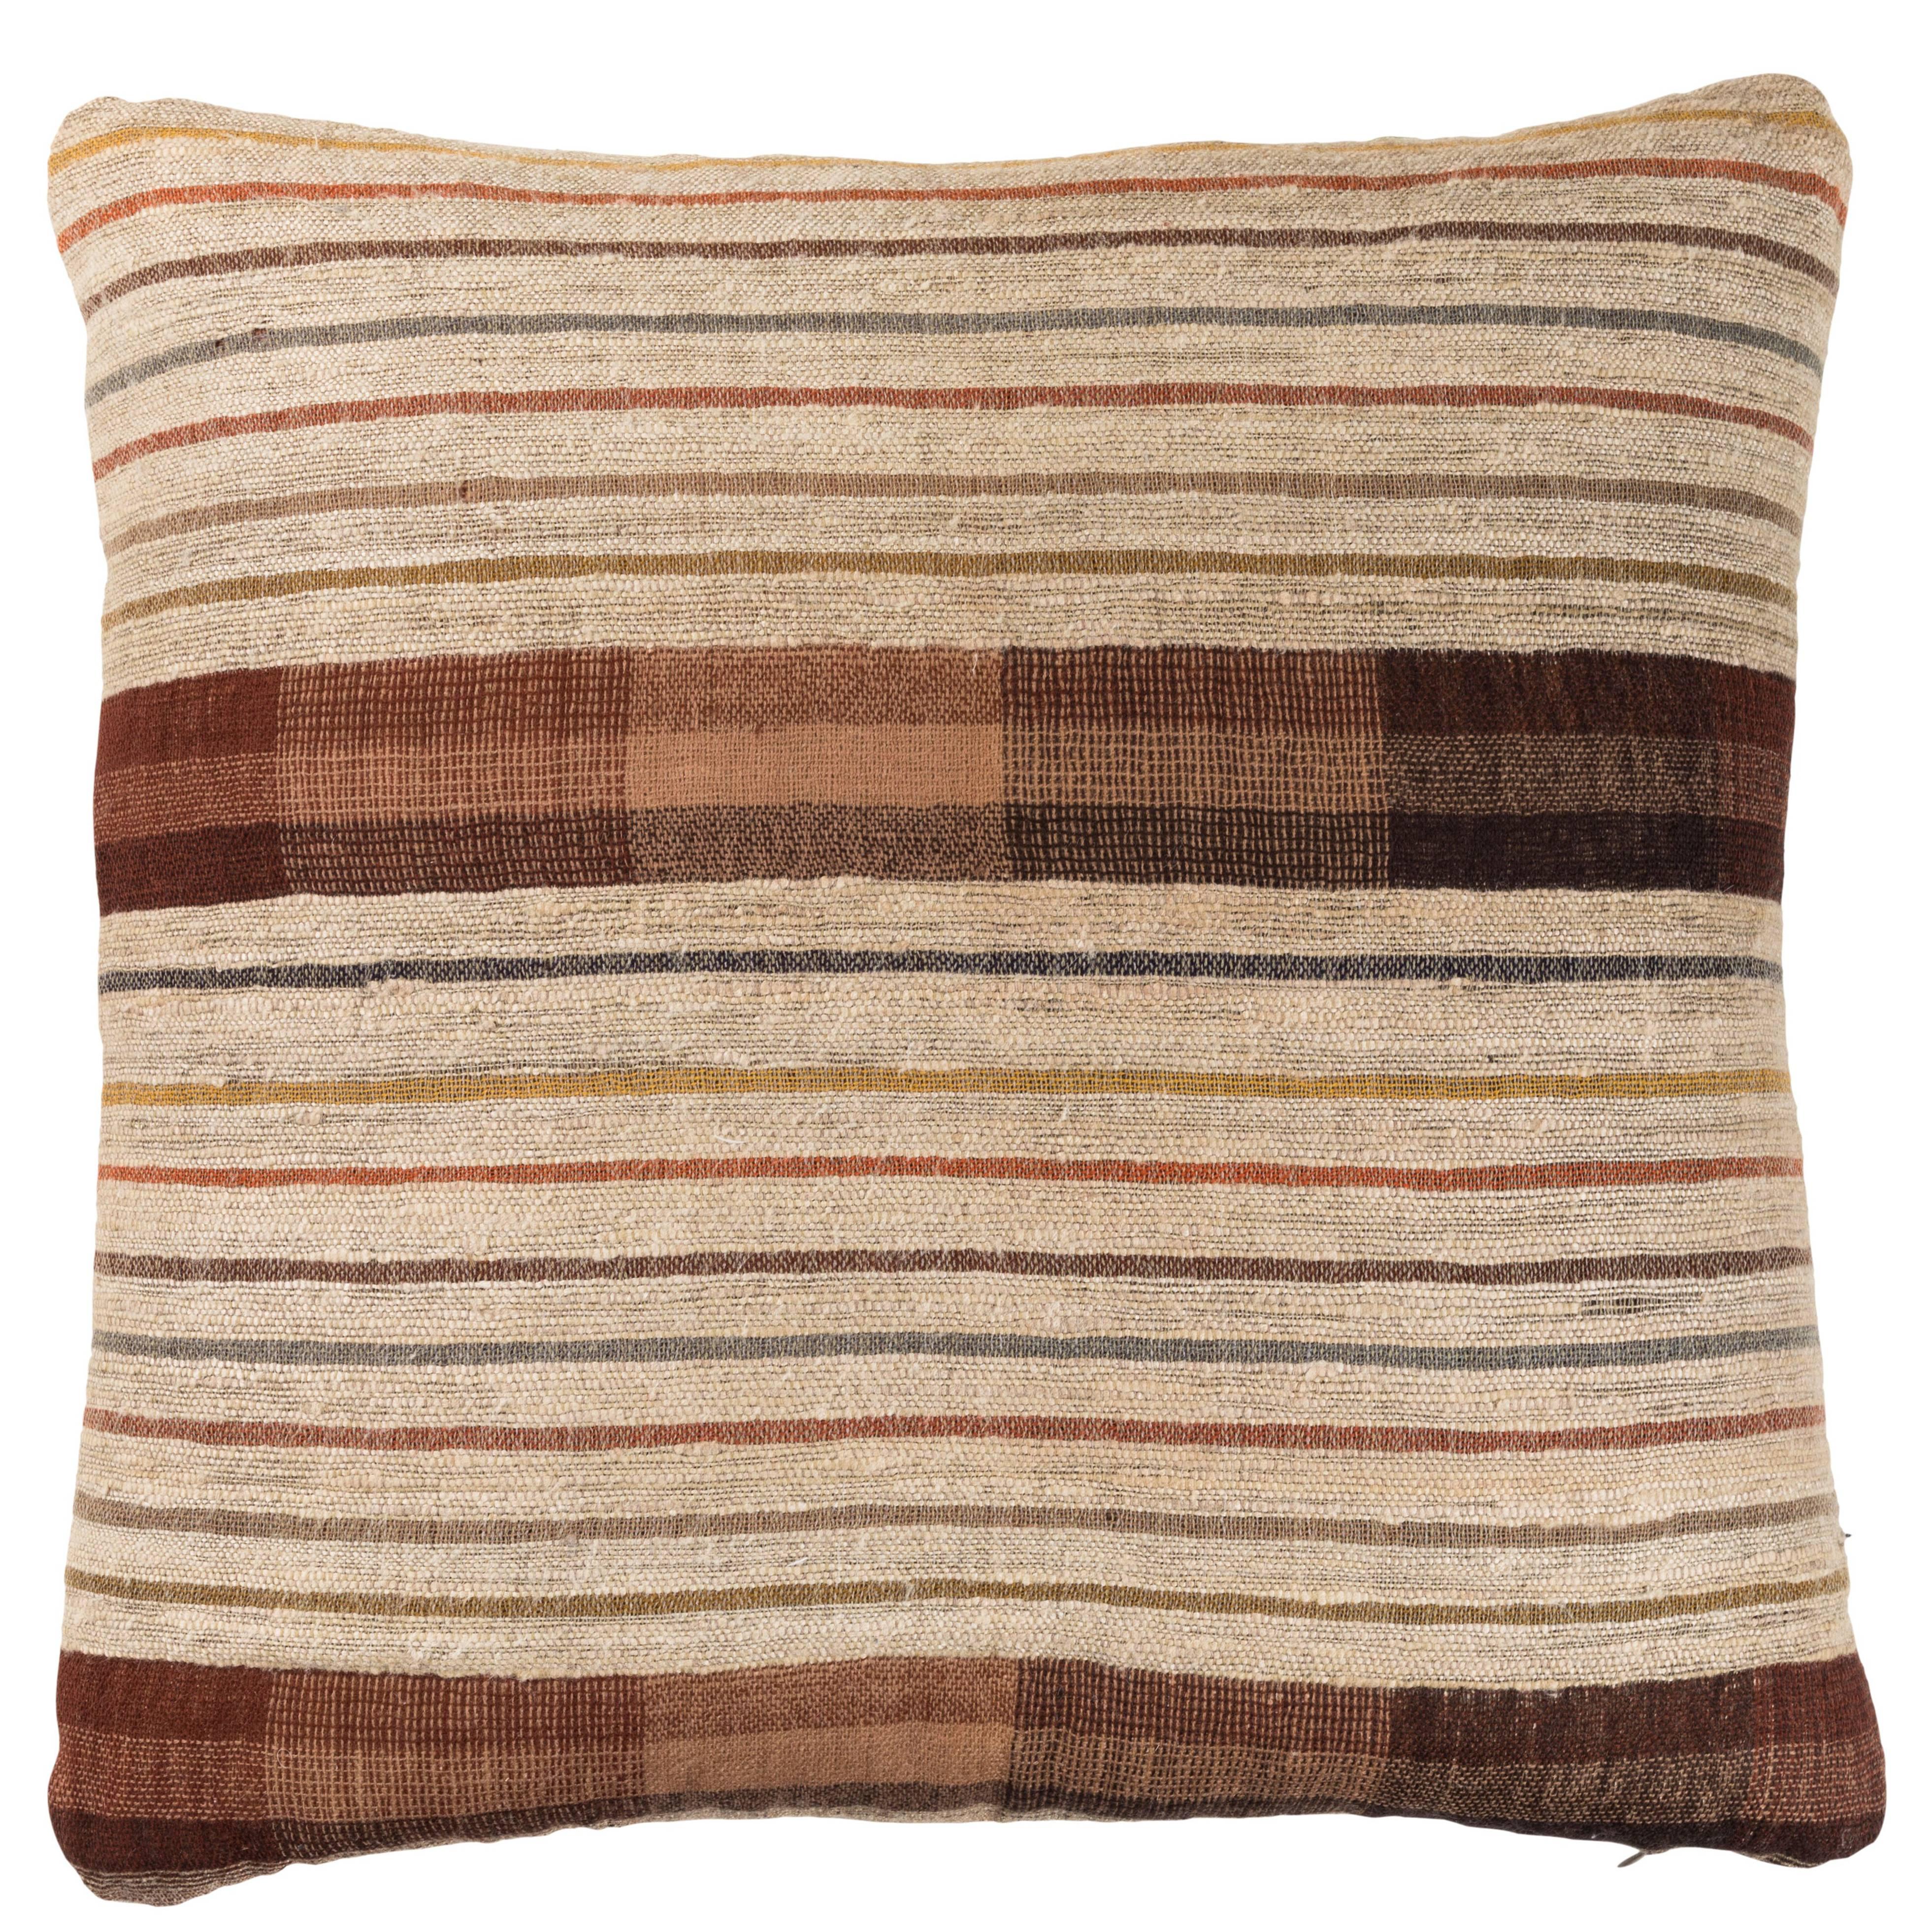 Memo Indian Handwoven Pillow For Sale